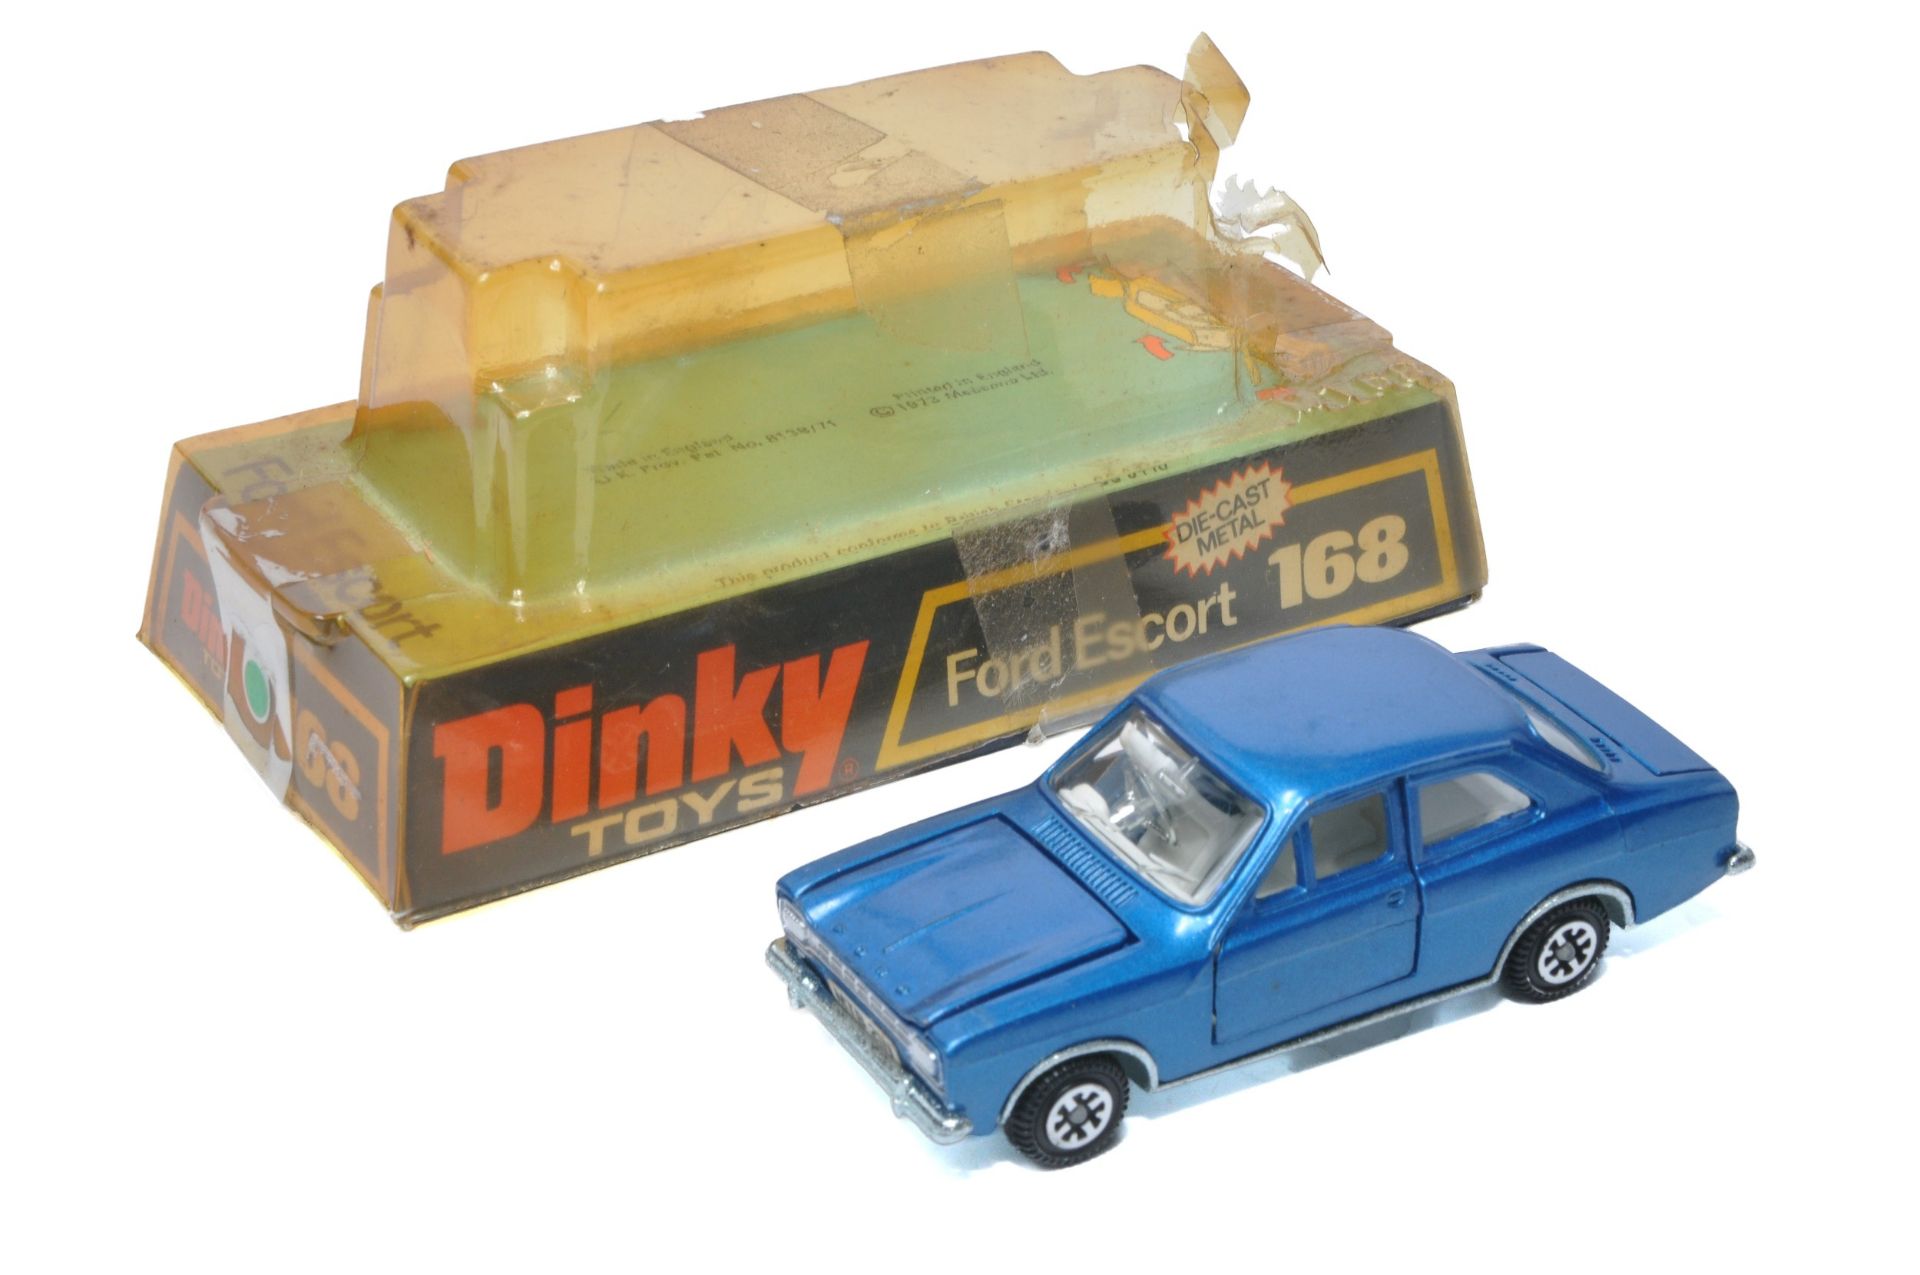 Dinky No. 168 Ford Escort. Metallic blue with white interior. Displays very good with the odd